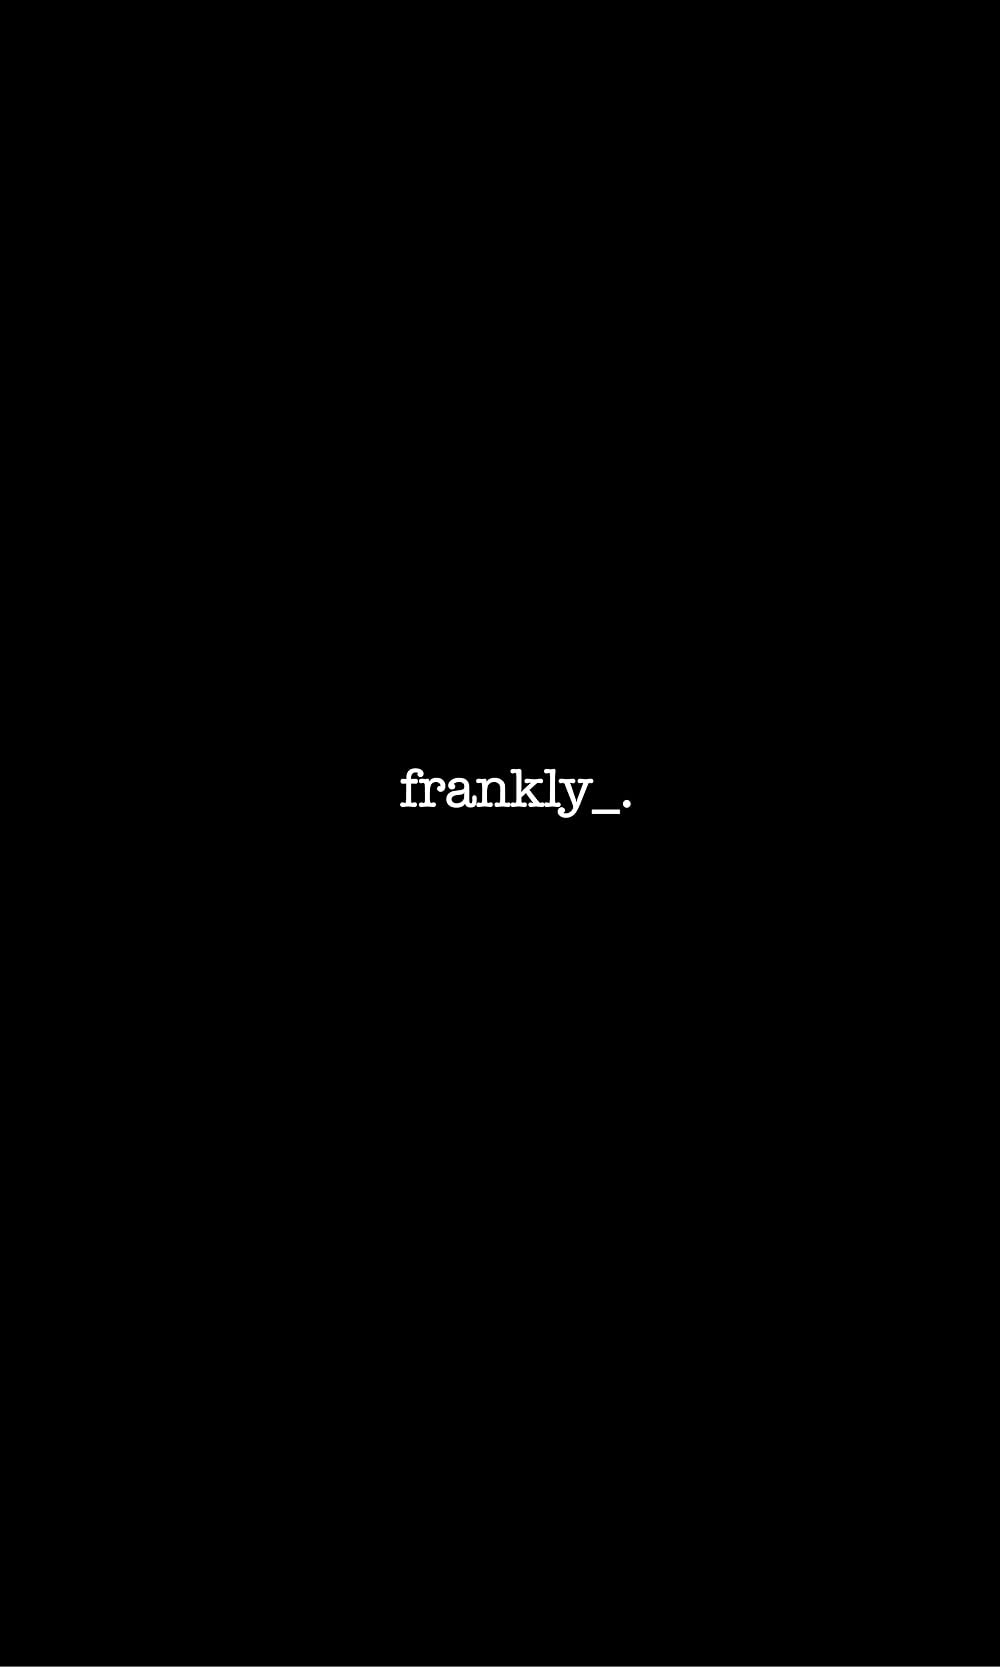 Frankly